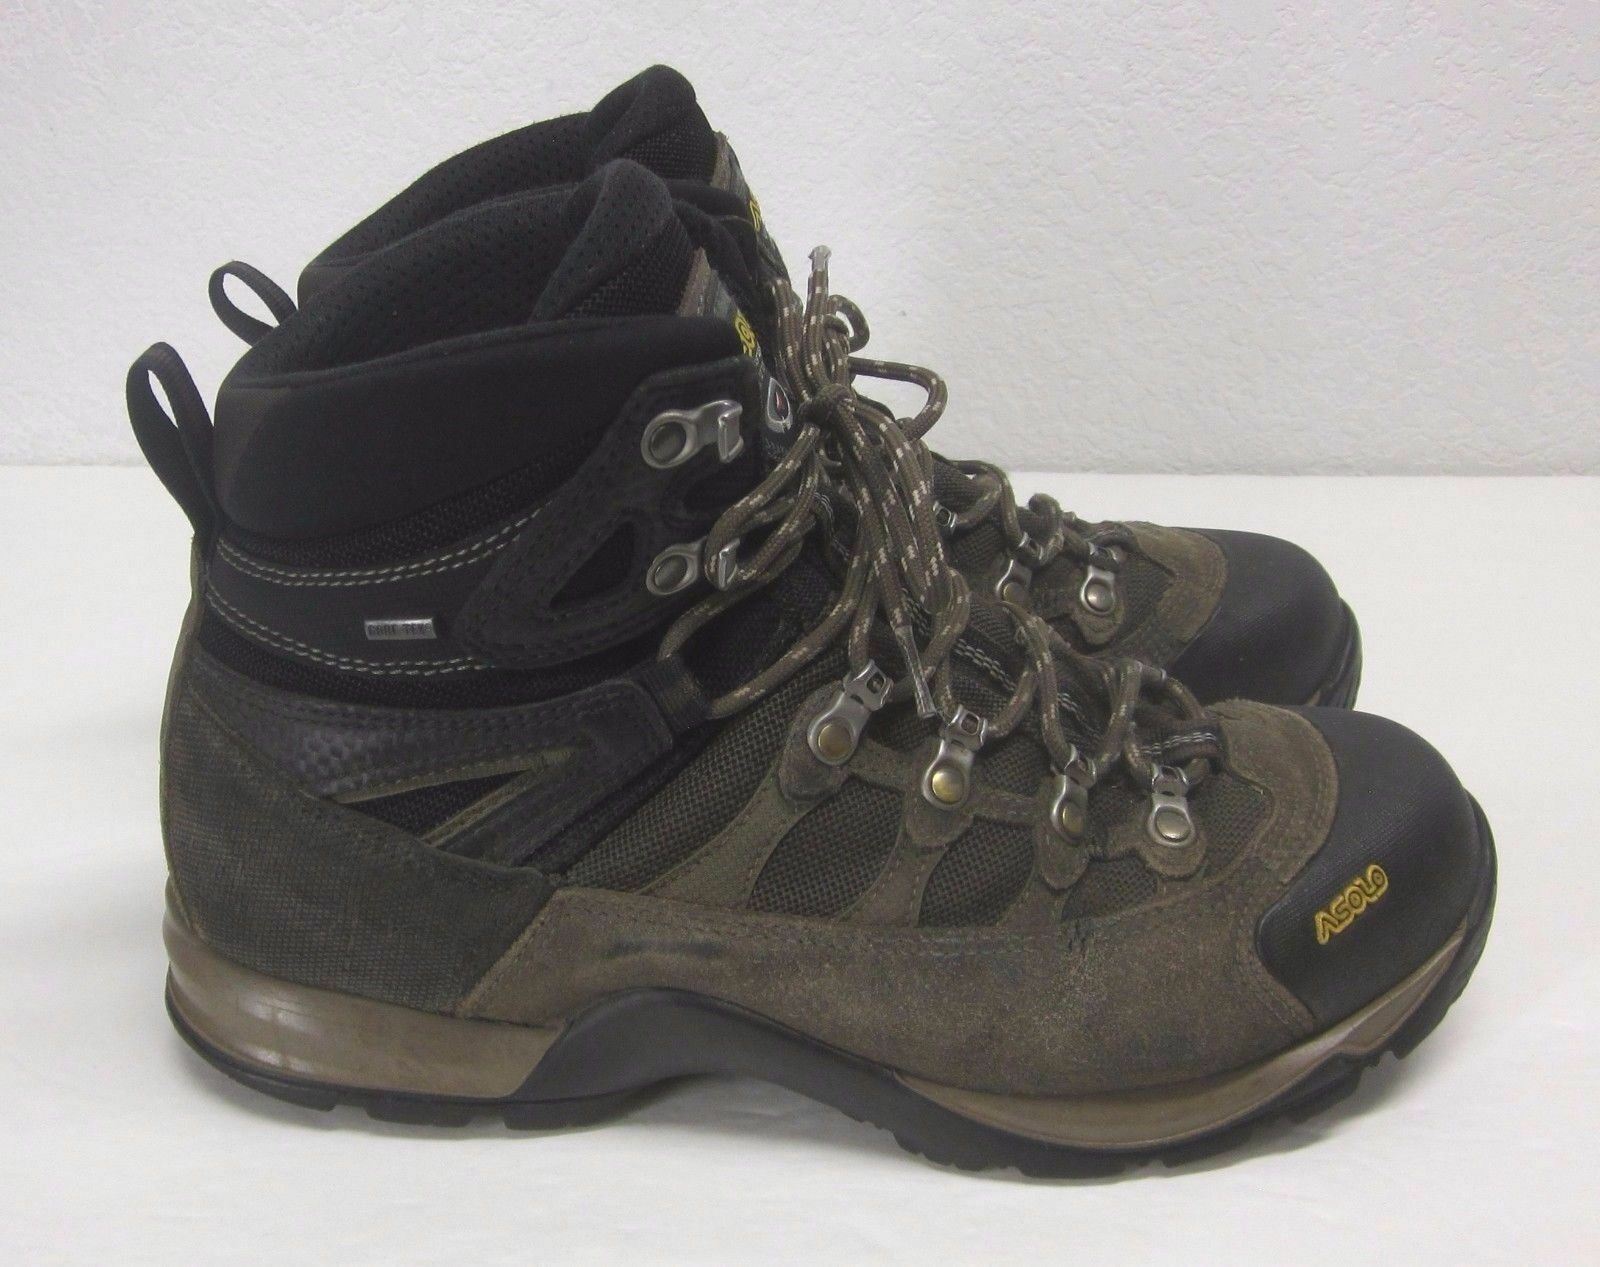 ASOLO STYNGER GTX LACER ANKLE BOOTS WOMEN'S (10) GORE-TEX SUEDE HIKING ...